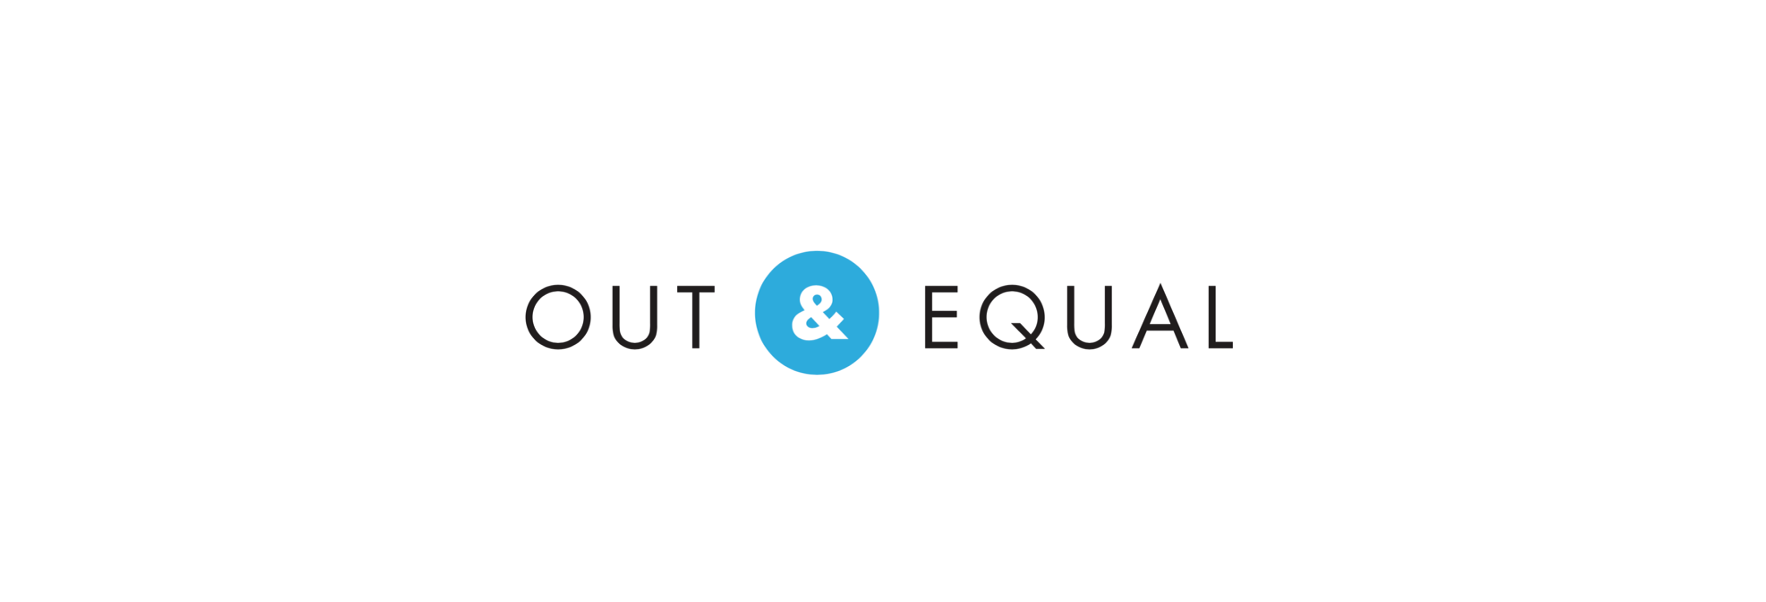 Out_&_Equal_Partner_Insights_Windo